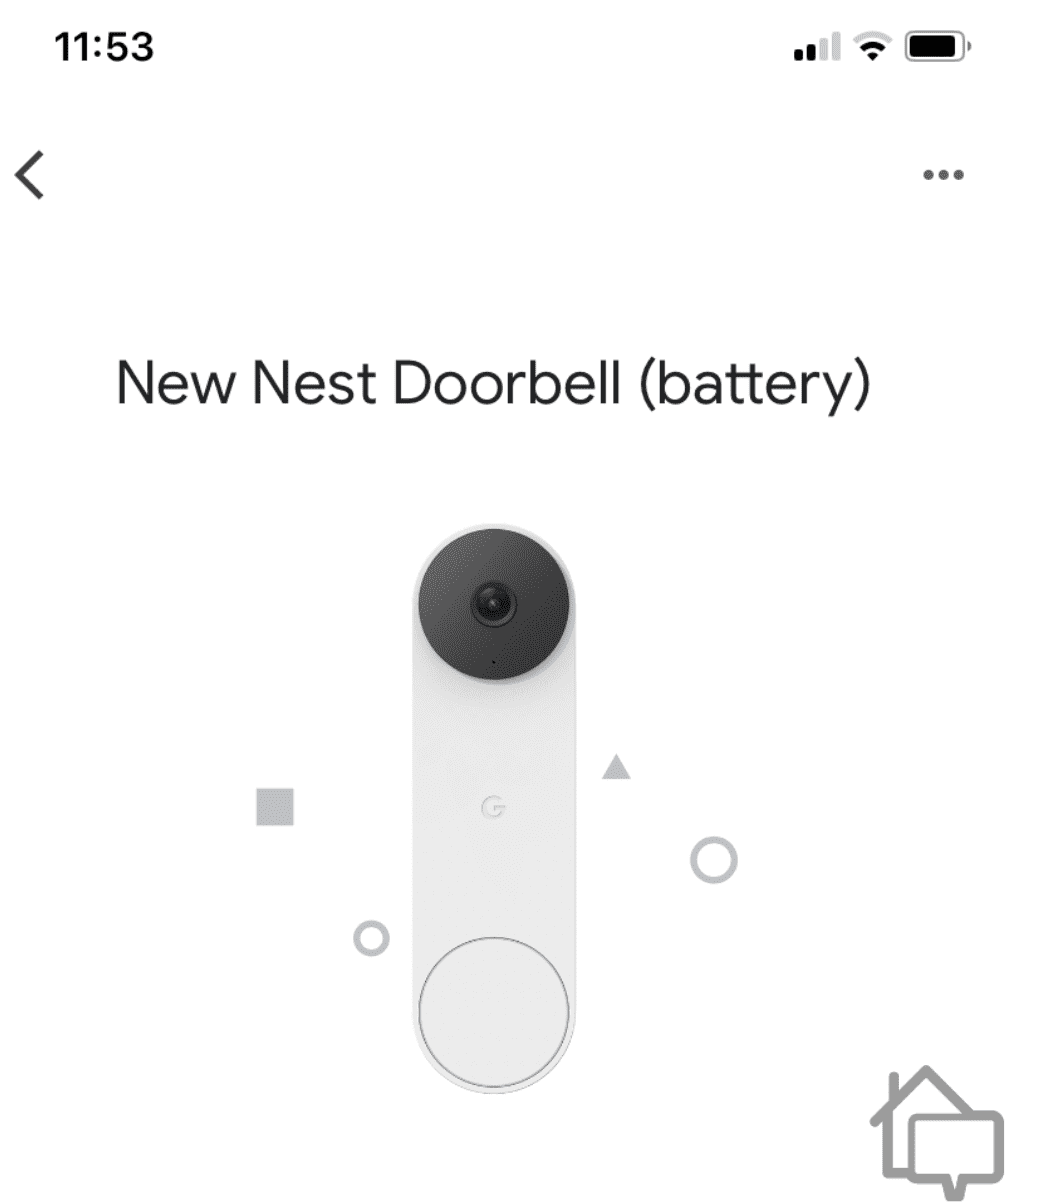 The Nest Doorbell is easy to set up in the Google Home app.